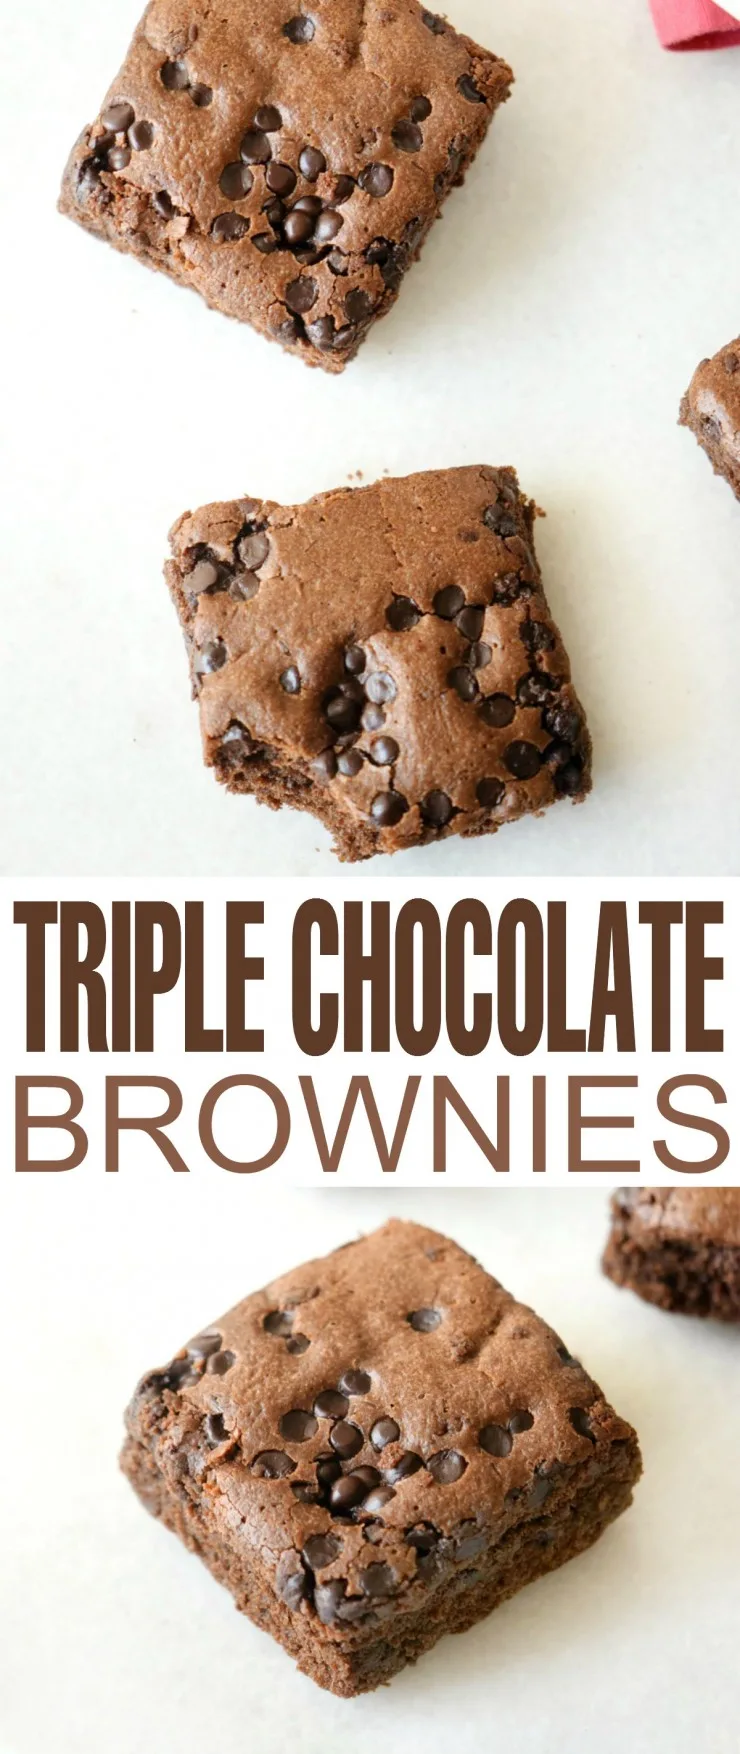 This Triple Chocolate Brownie recipe is perfect for any chocolate lover. Rich and full of flavour, this is a perfect dessert!